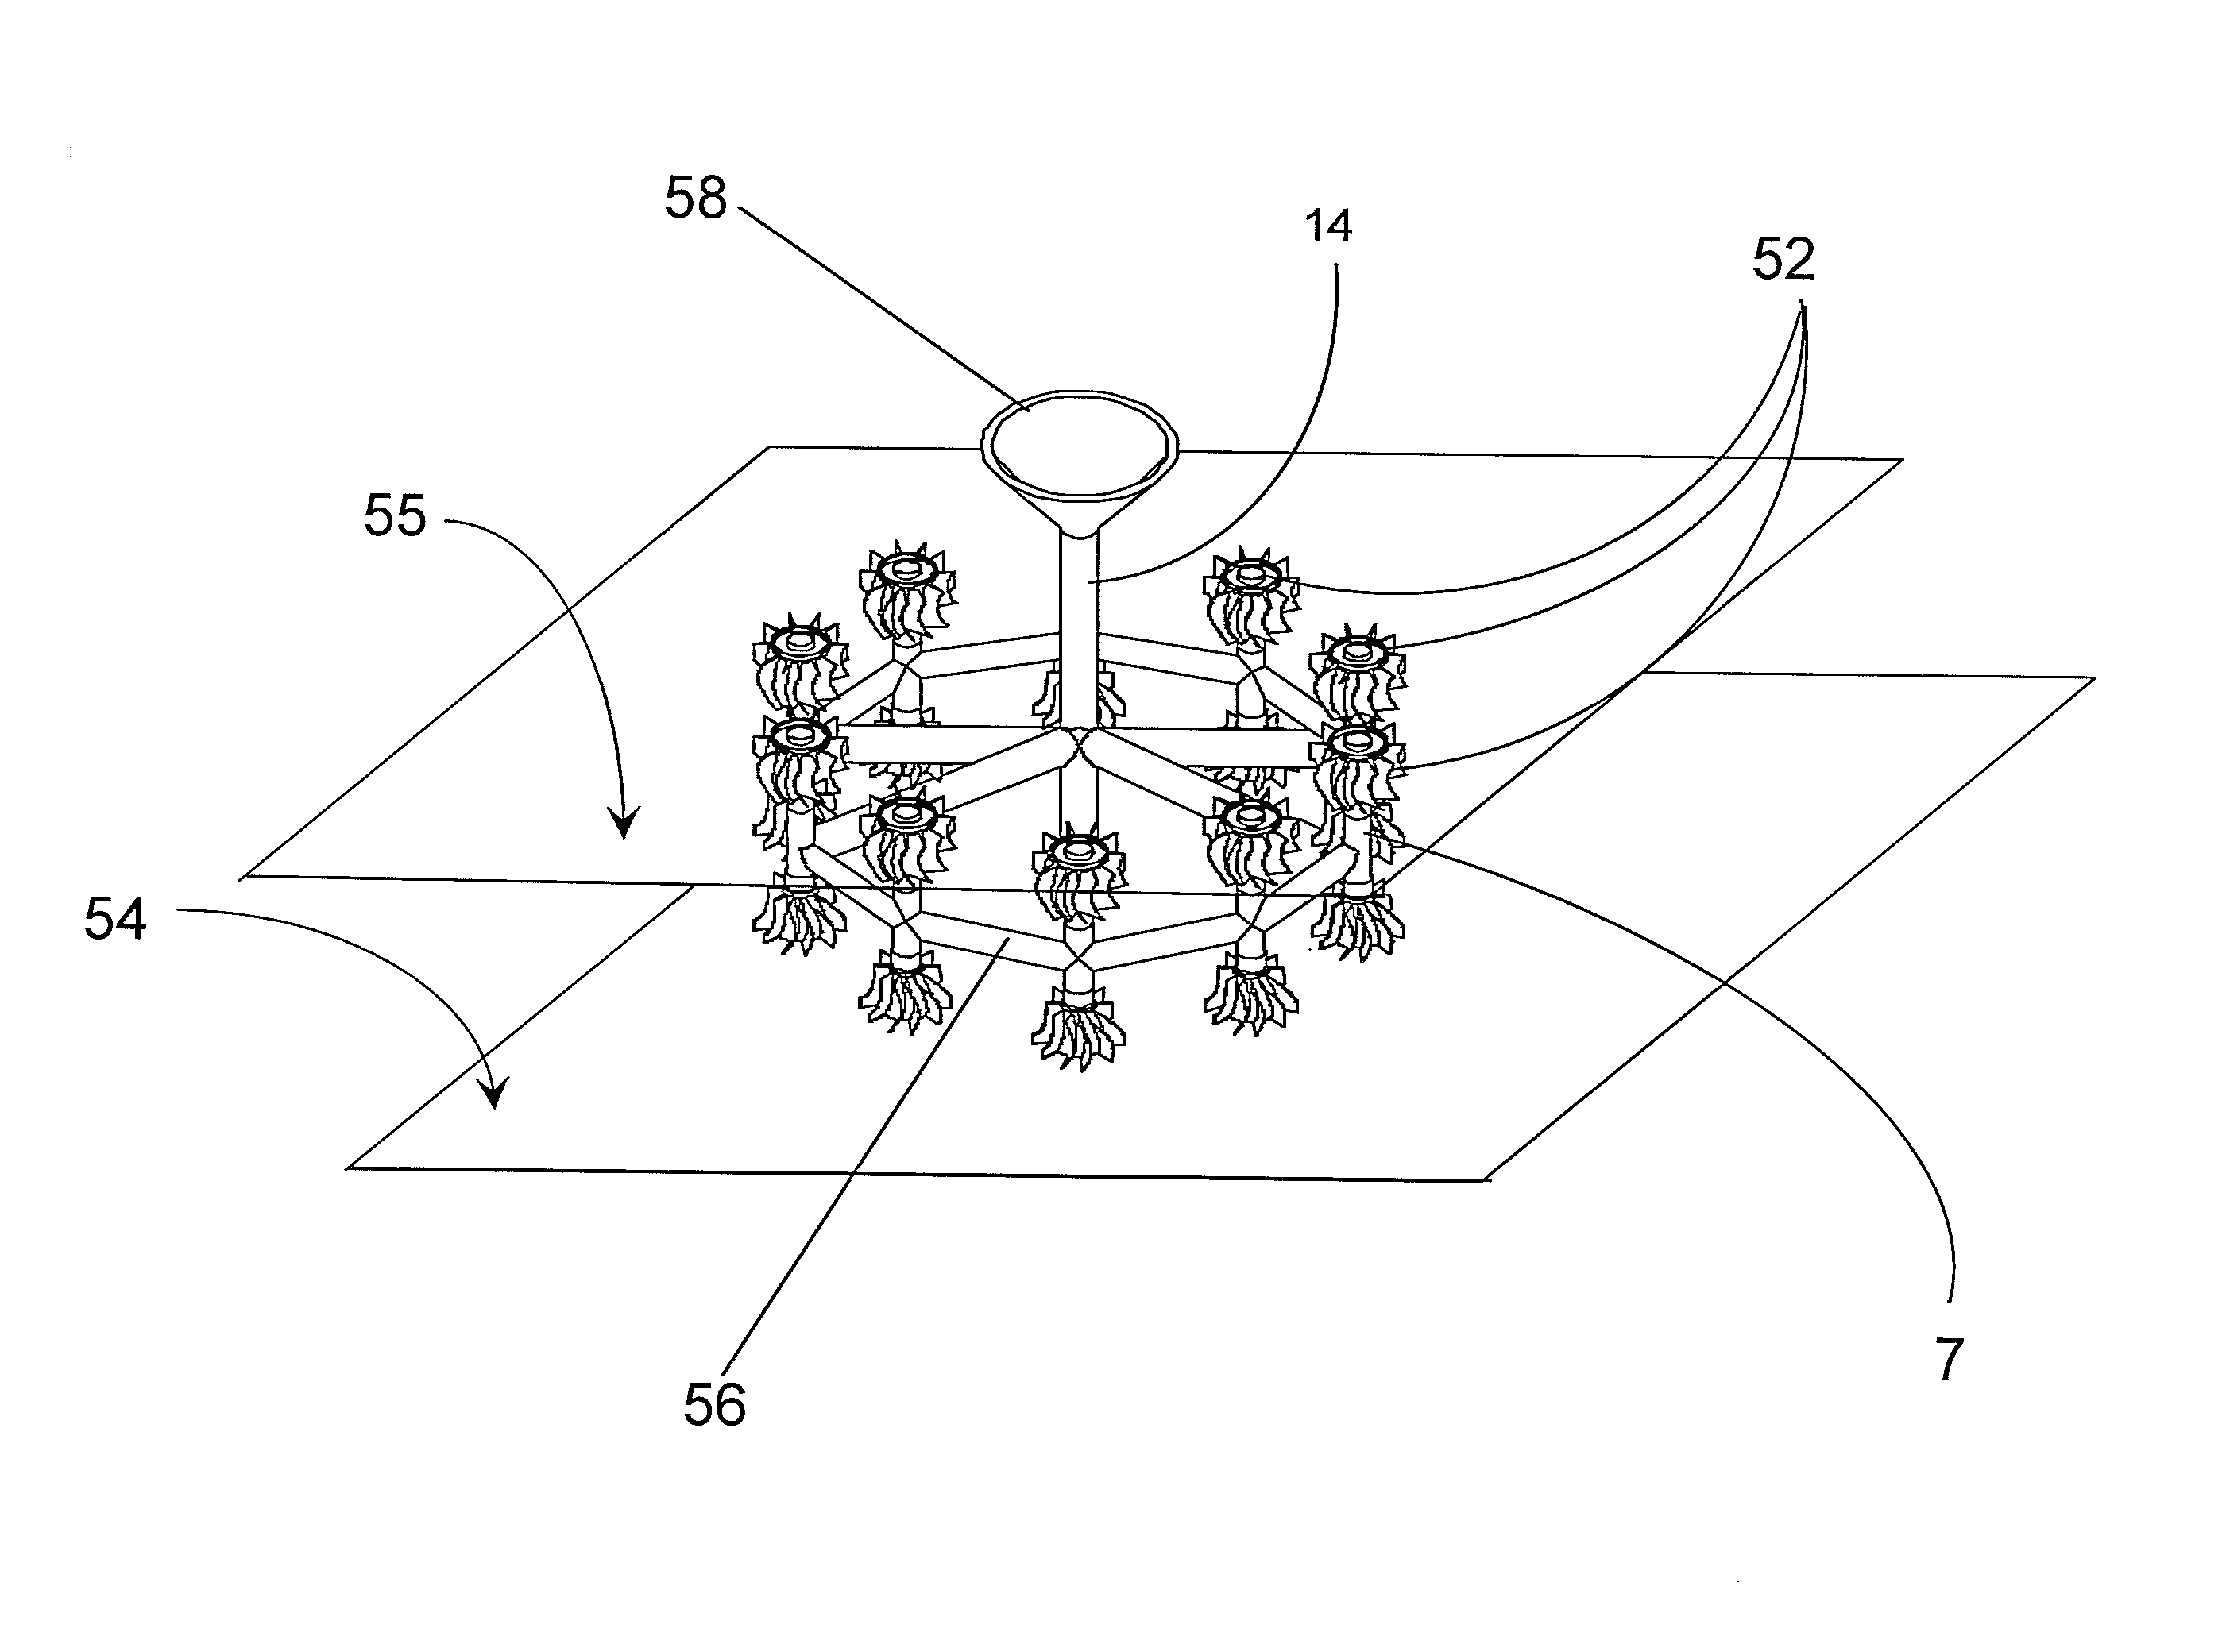 Method for rapid generation of multiple investment cast parts such as turbine or compressor wheels